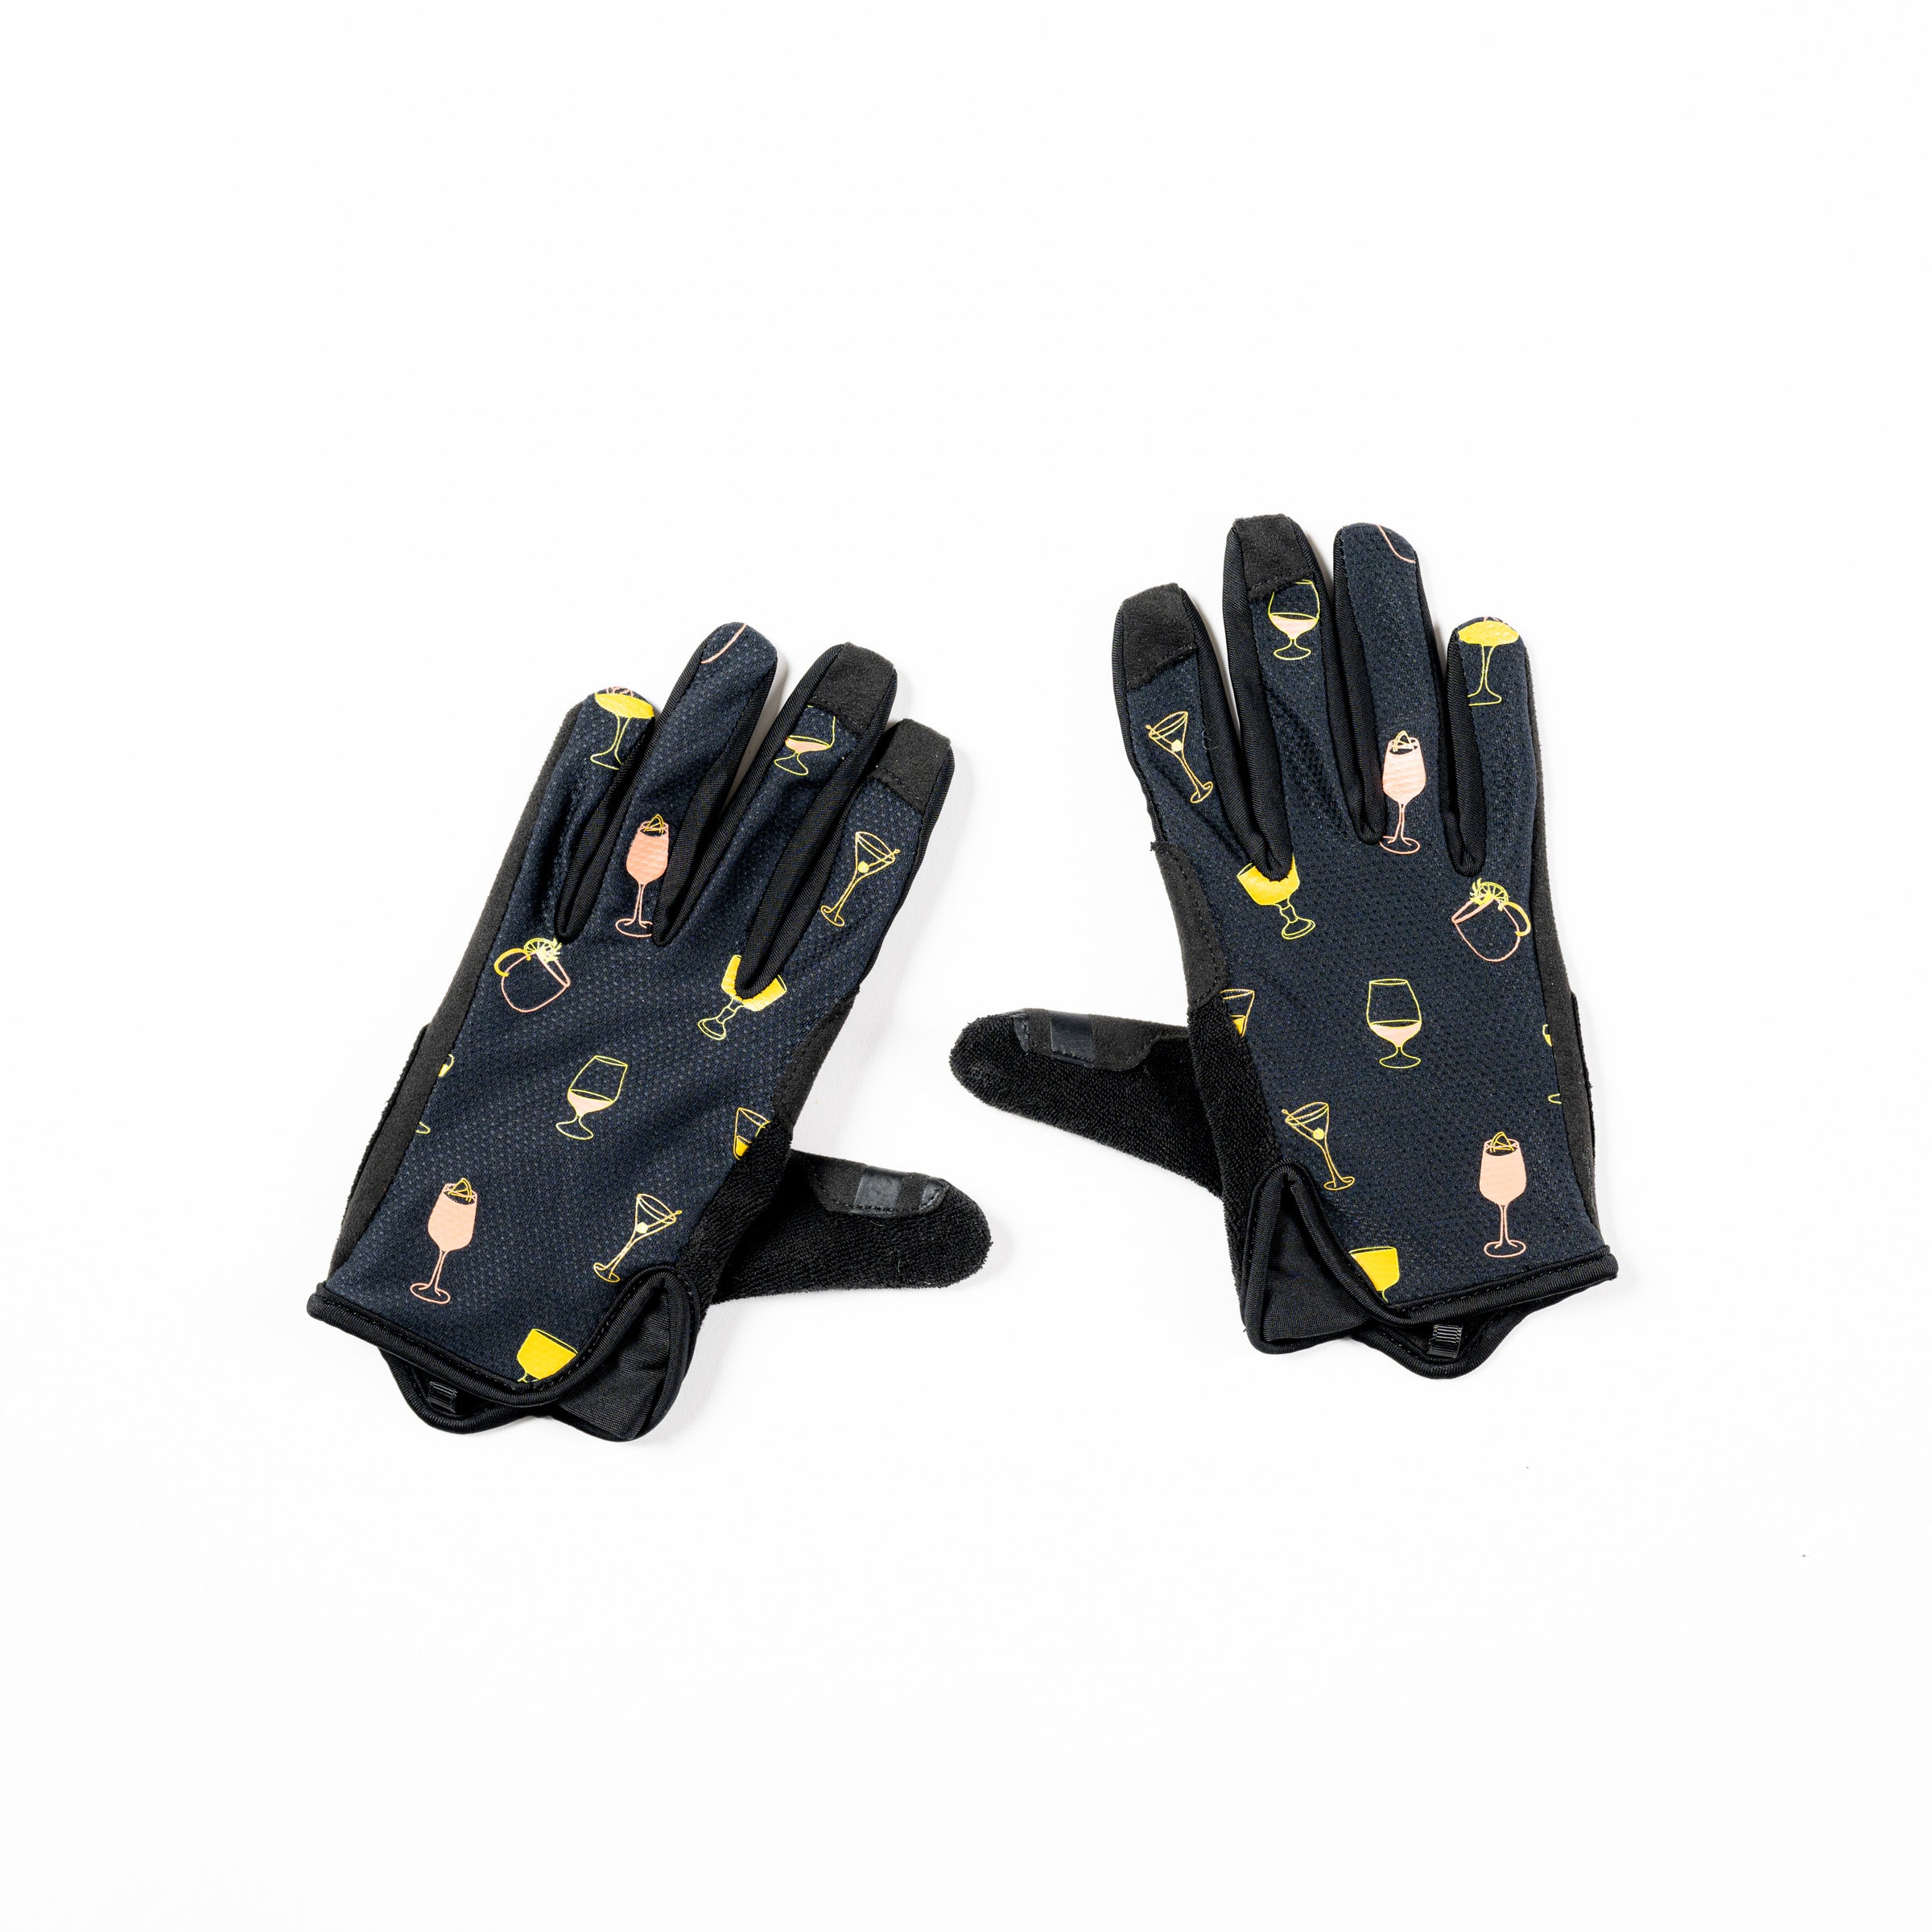 New Black x Gold Louis Gloves with Strap - MX | MTB | Street